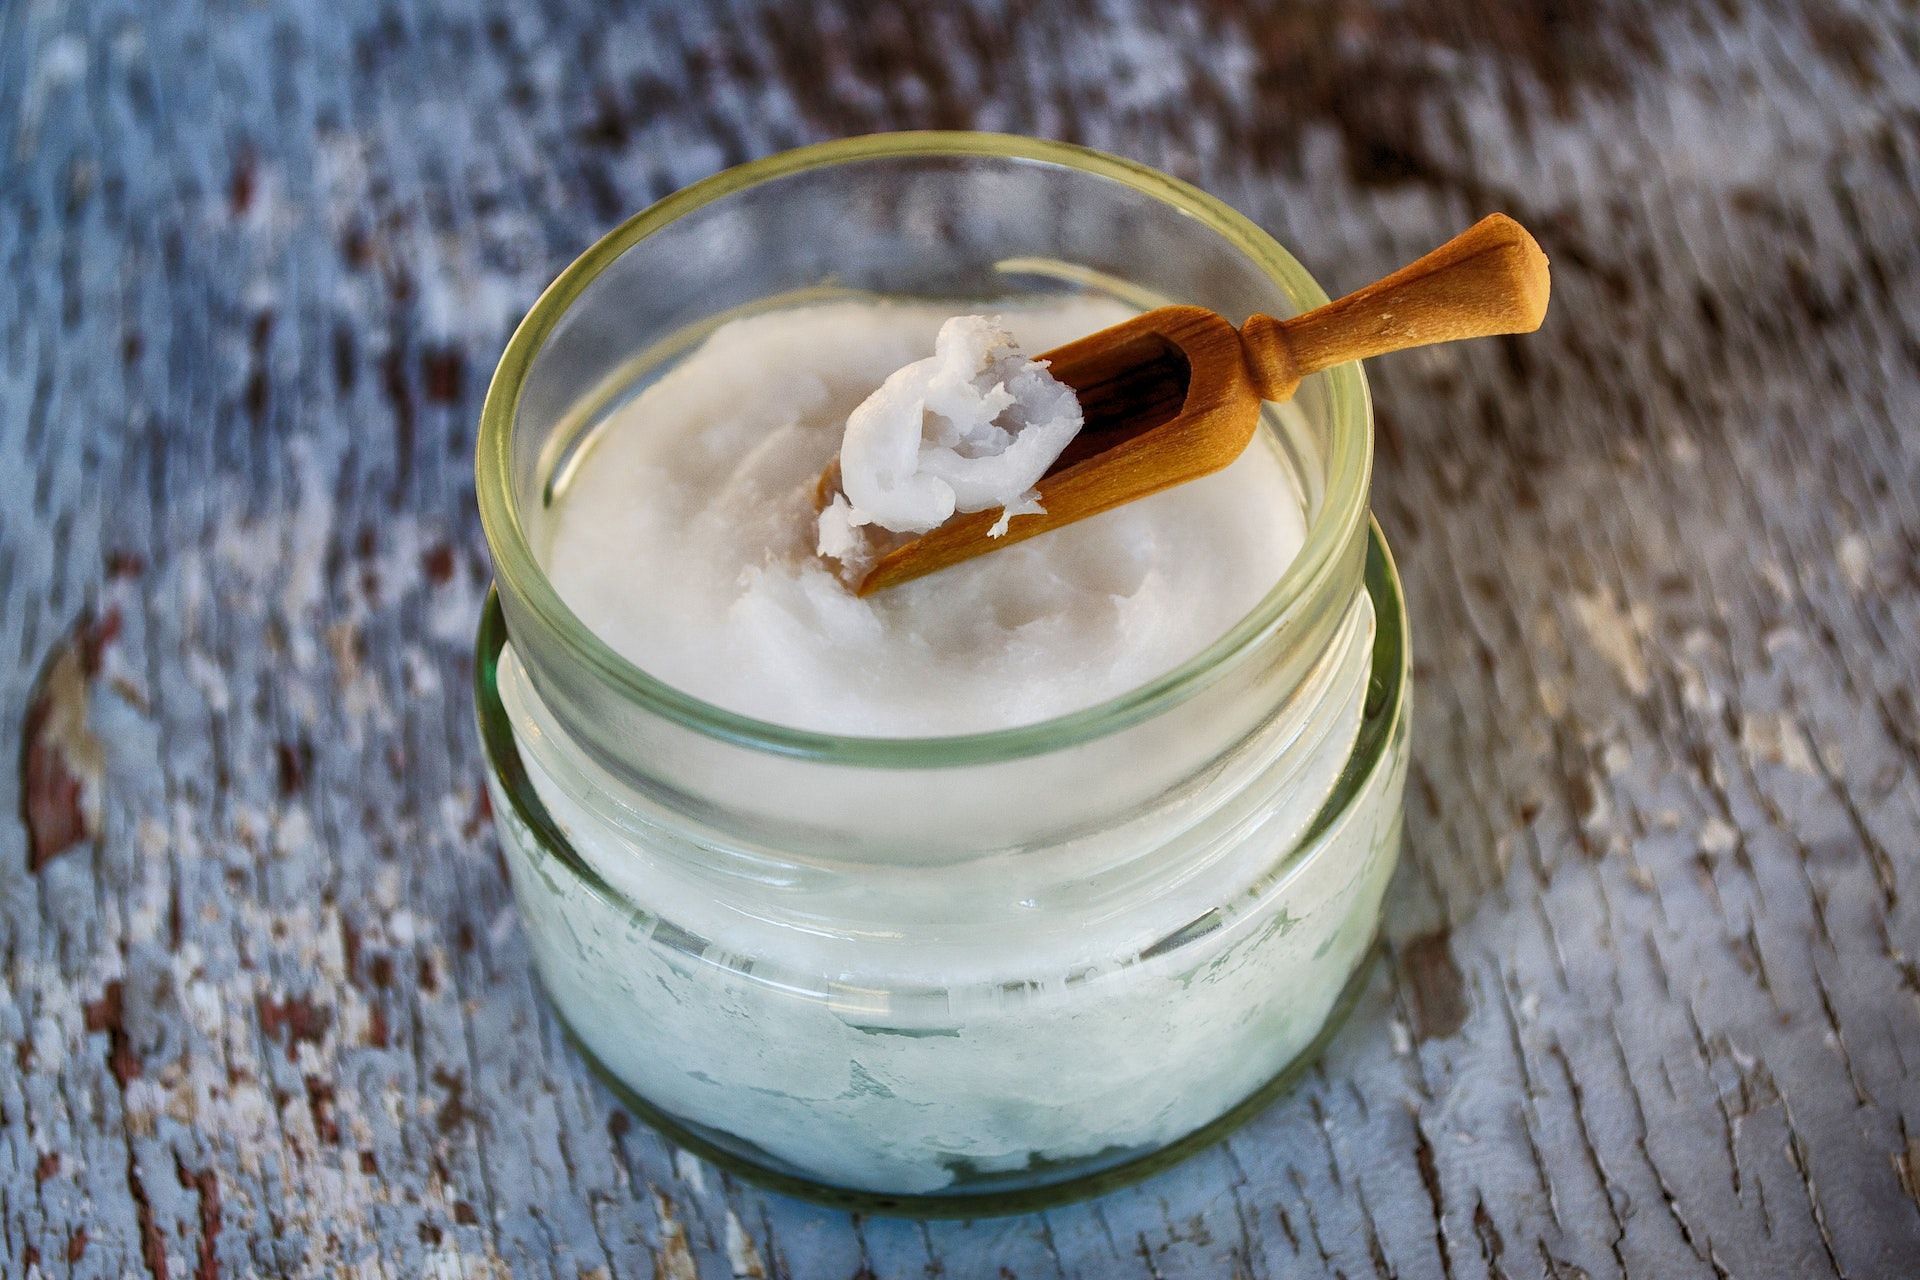 Applying coconut oil is one of the most effective remedies for a dry nose. (Photo via Pexels/Dana Tentis)